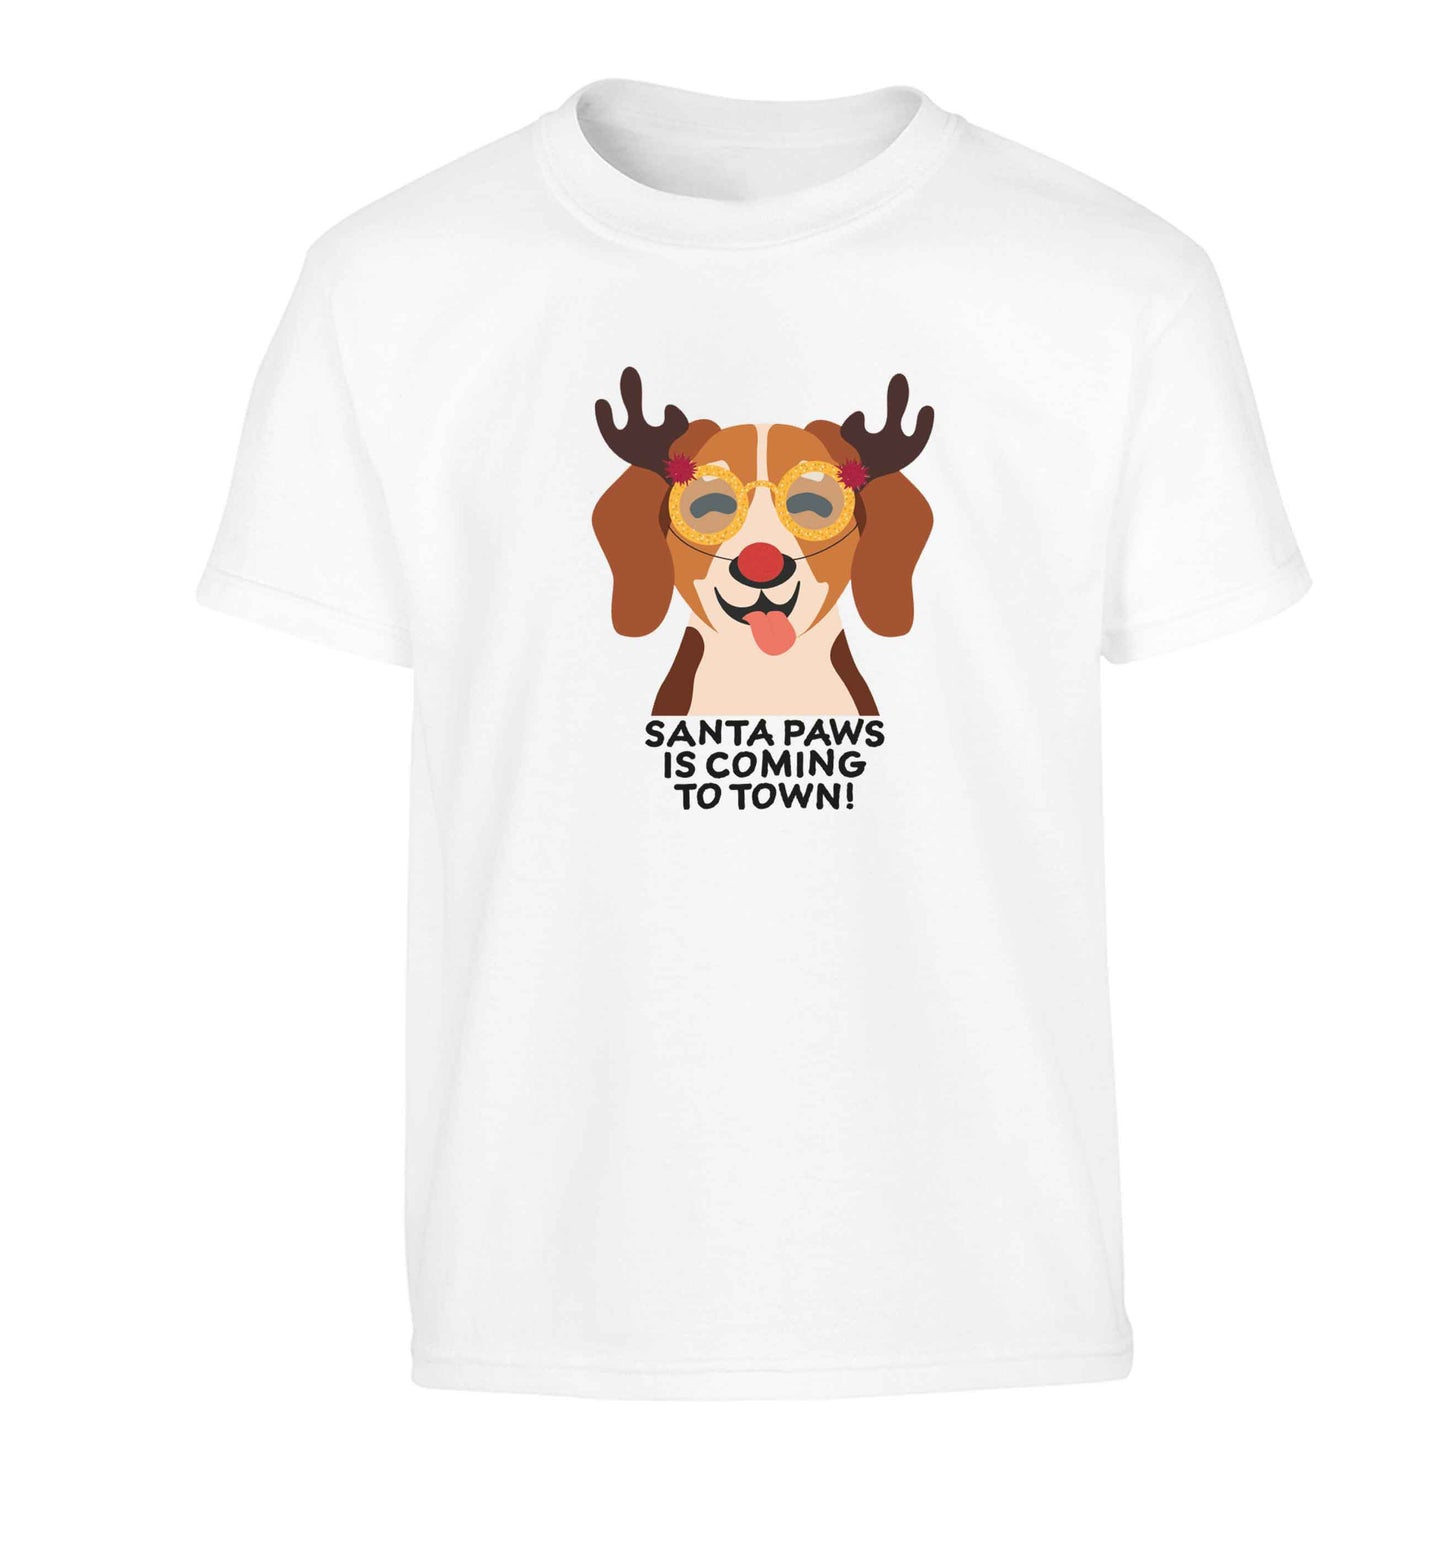 Santa paws is coming to town Children's white Tshirt 12-13 Years